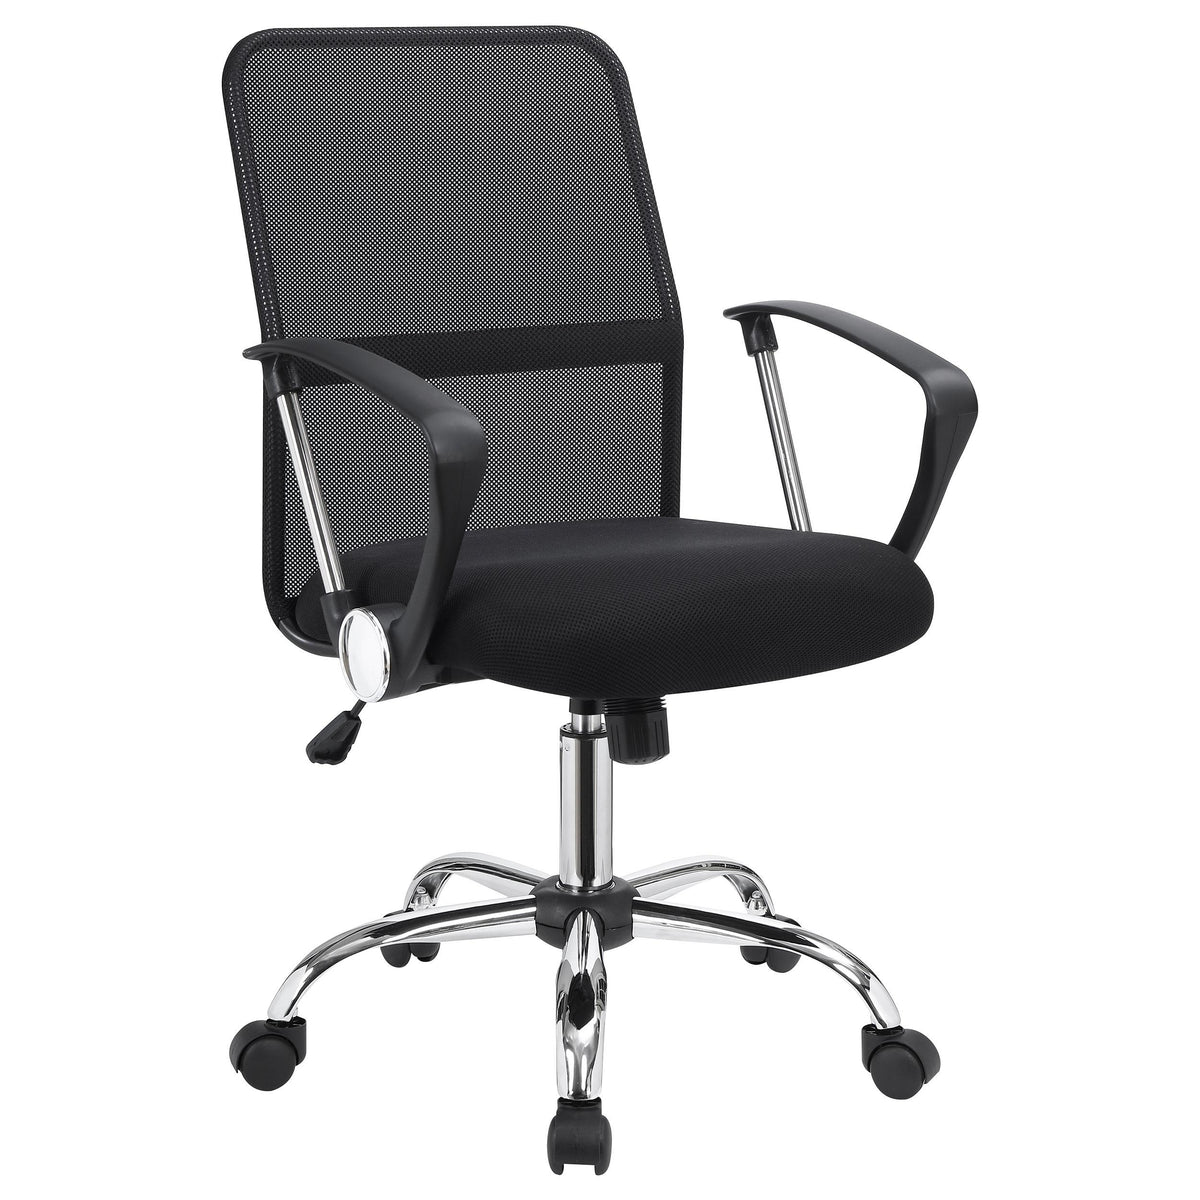 Gerta Office Chair with Mesh Backrest Black and Chrome  Las Vegas Furniture Stores